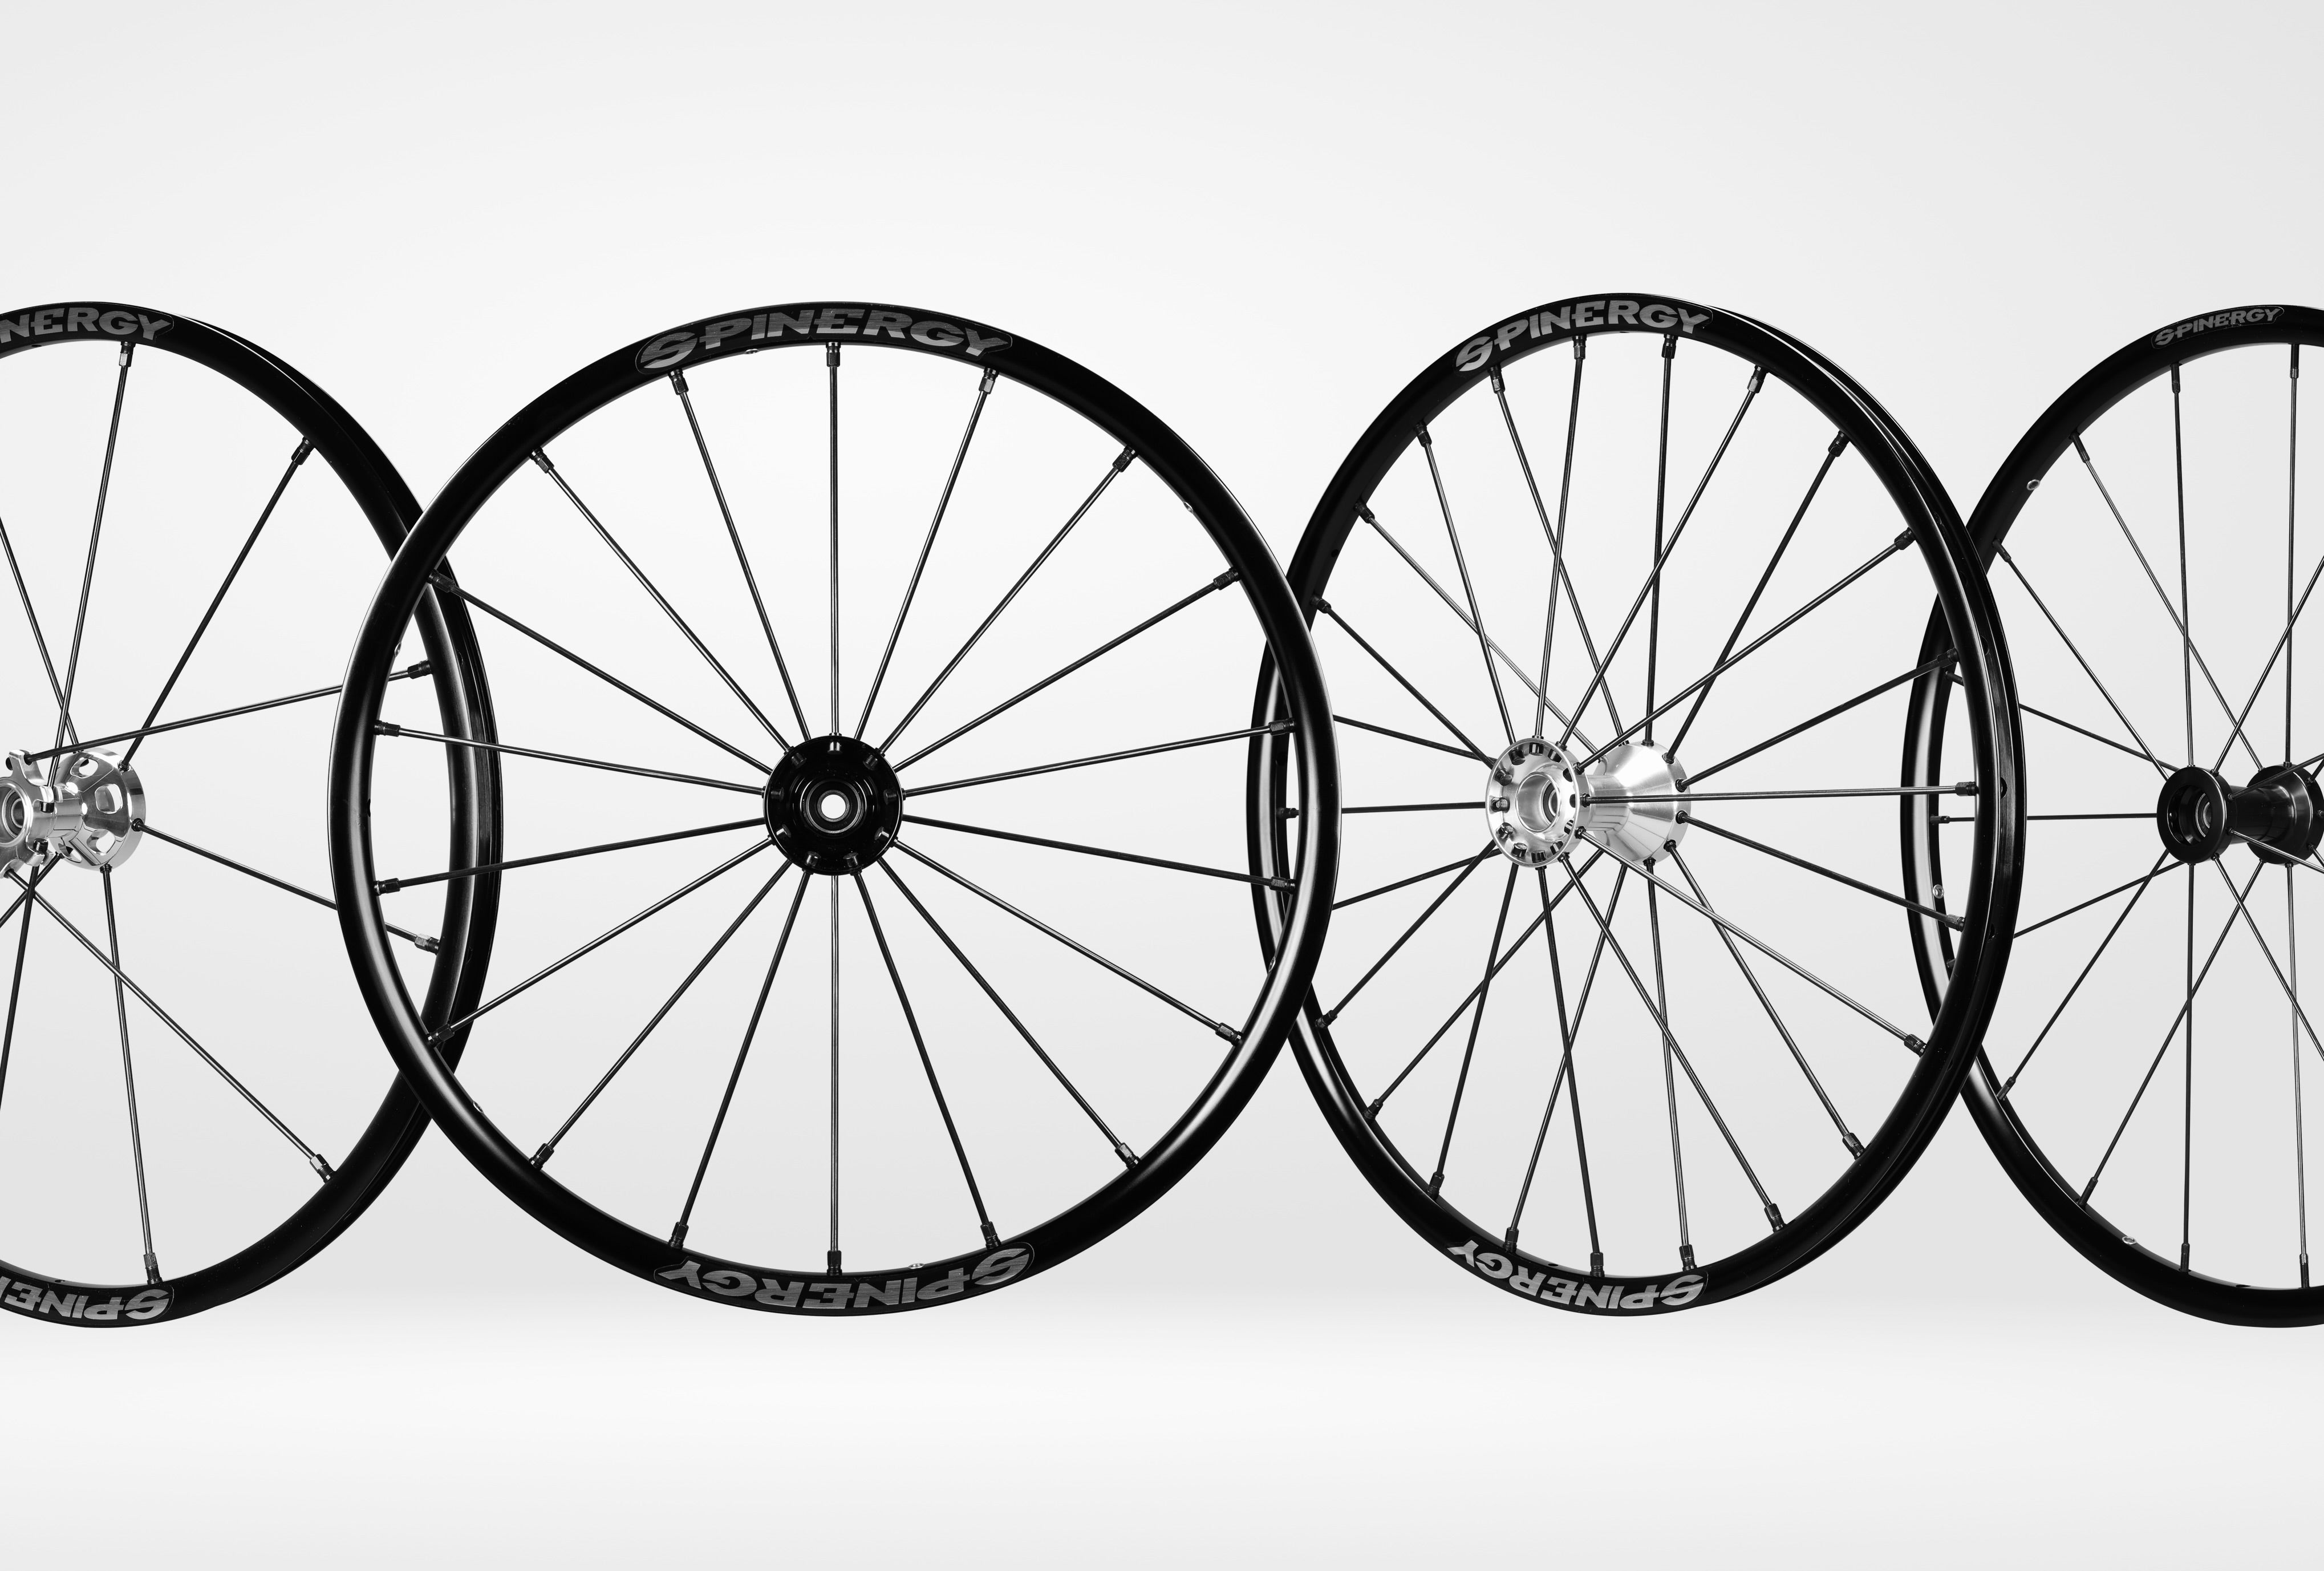 Group of different spinergy wheels